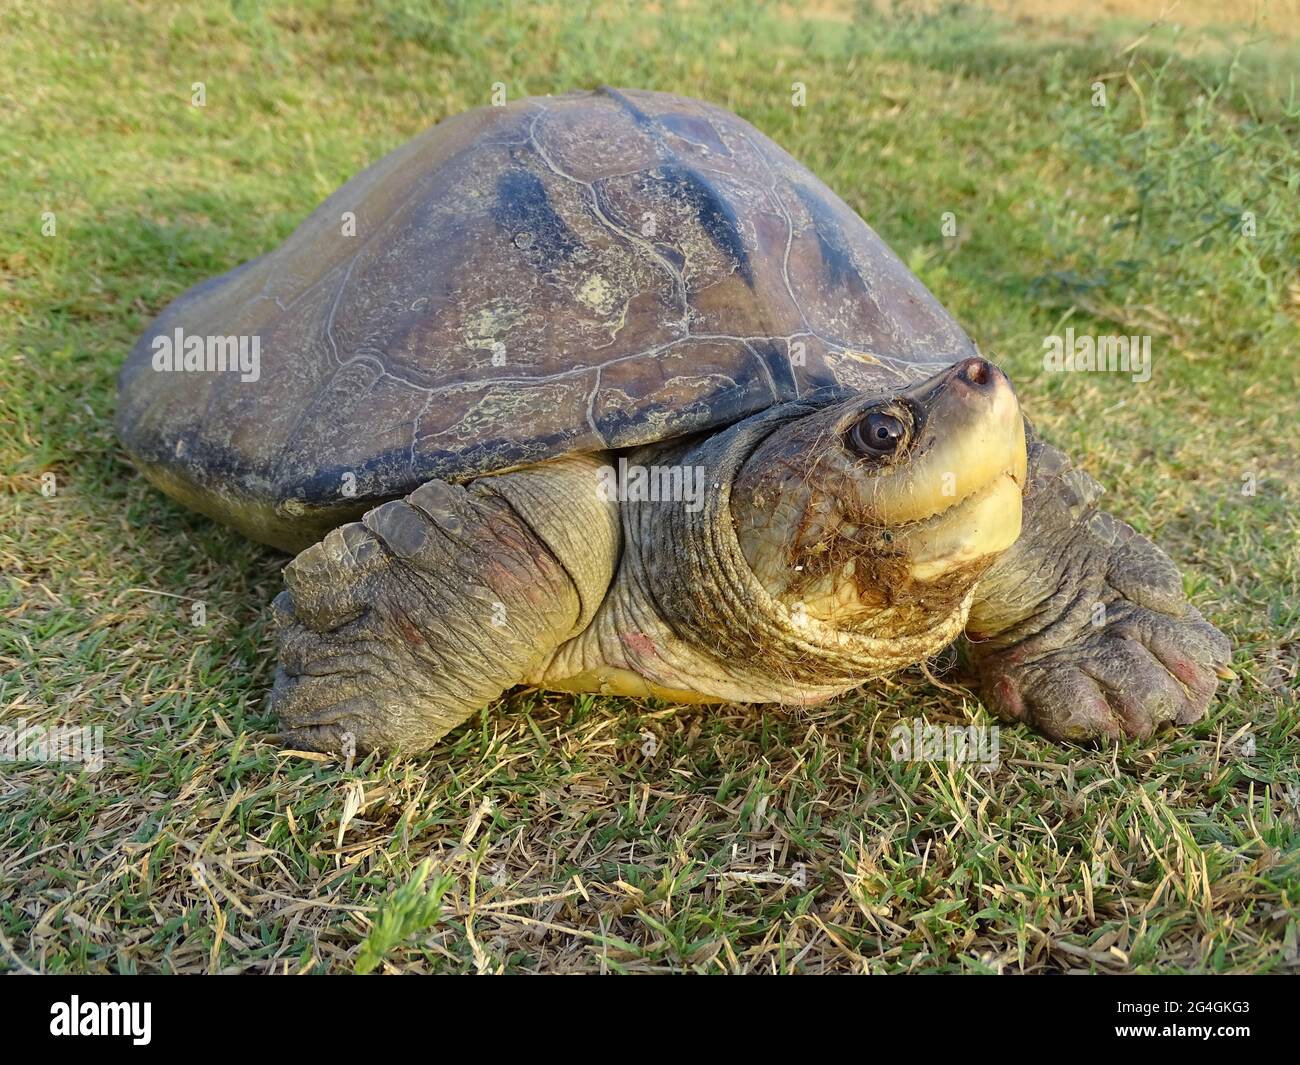 The three-striped roofed turtle, Batagur dhongoka GRAY, 1834 is a species of turtle in the family Geoemydidae. The species is endemic to South Asia. C Stock Photo